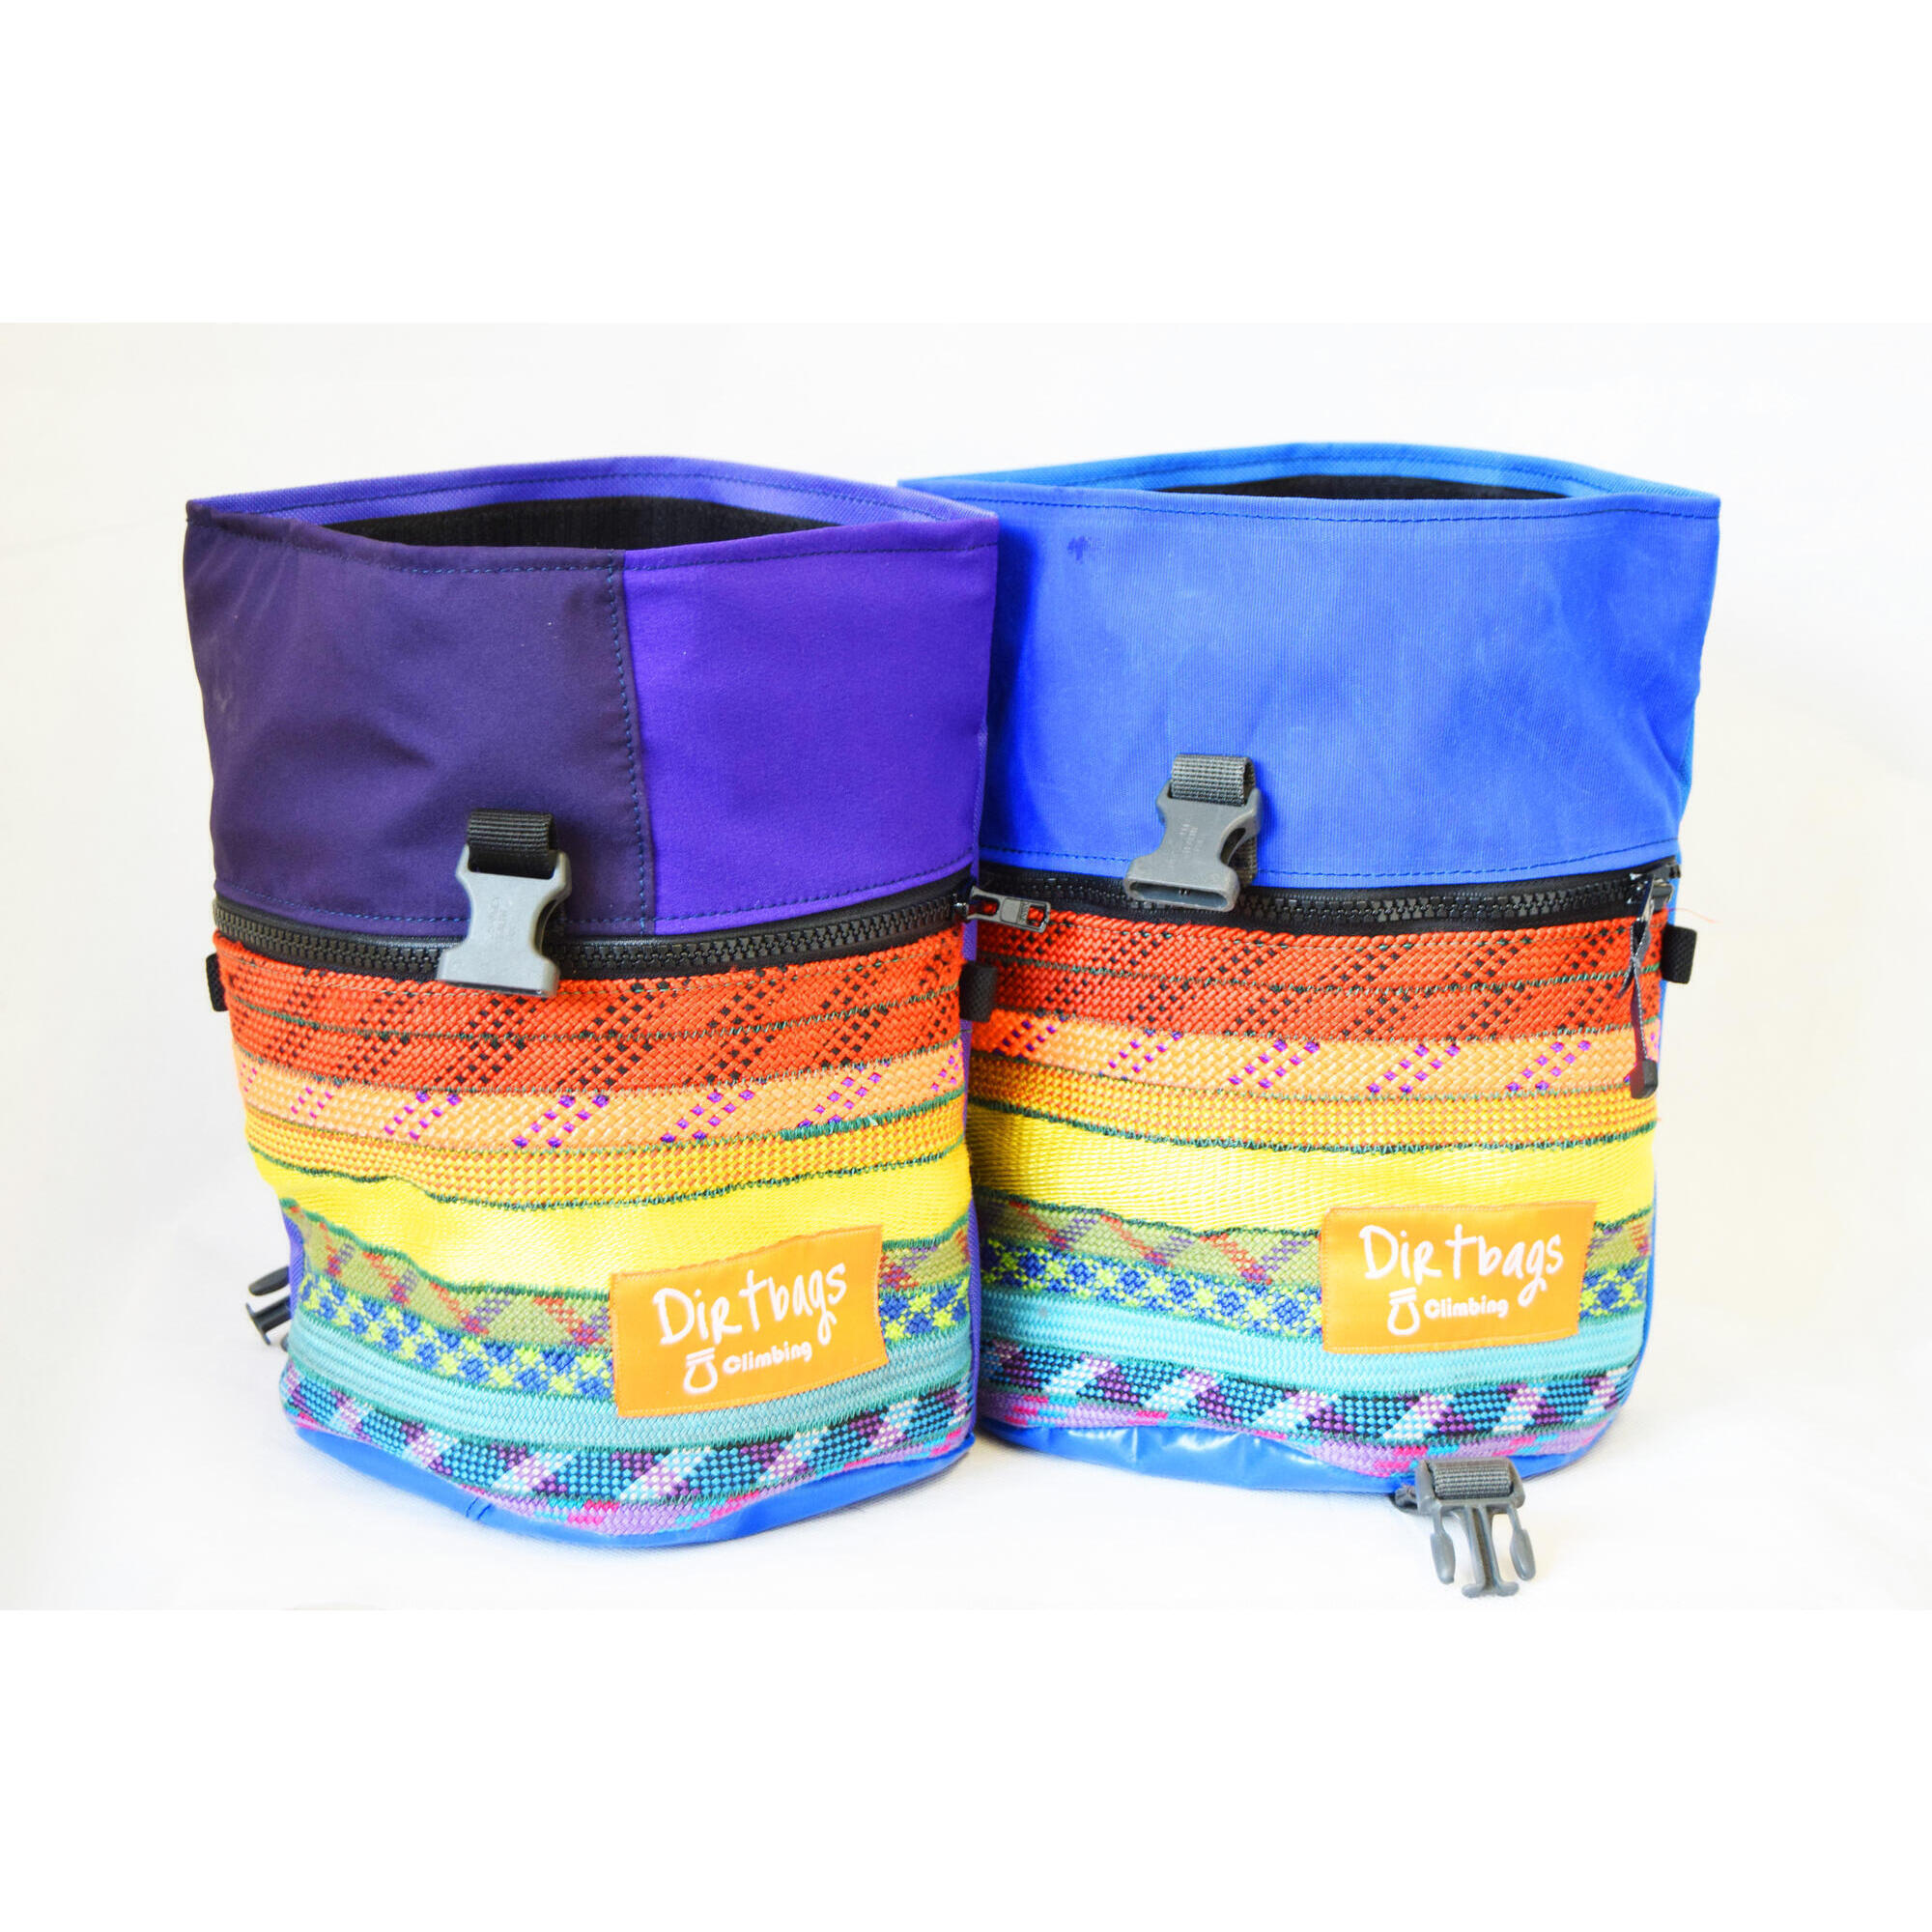 DIRTBAGS CLIMBING Boulder bag made with recycled climbing rope and upcycled fabric. Rainbow